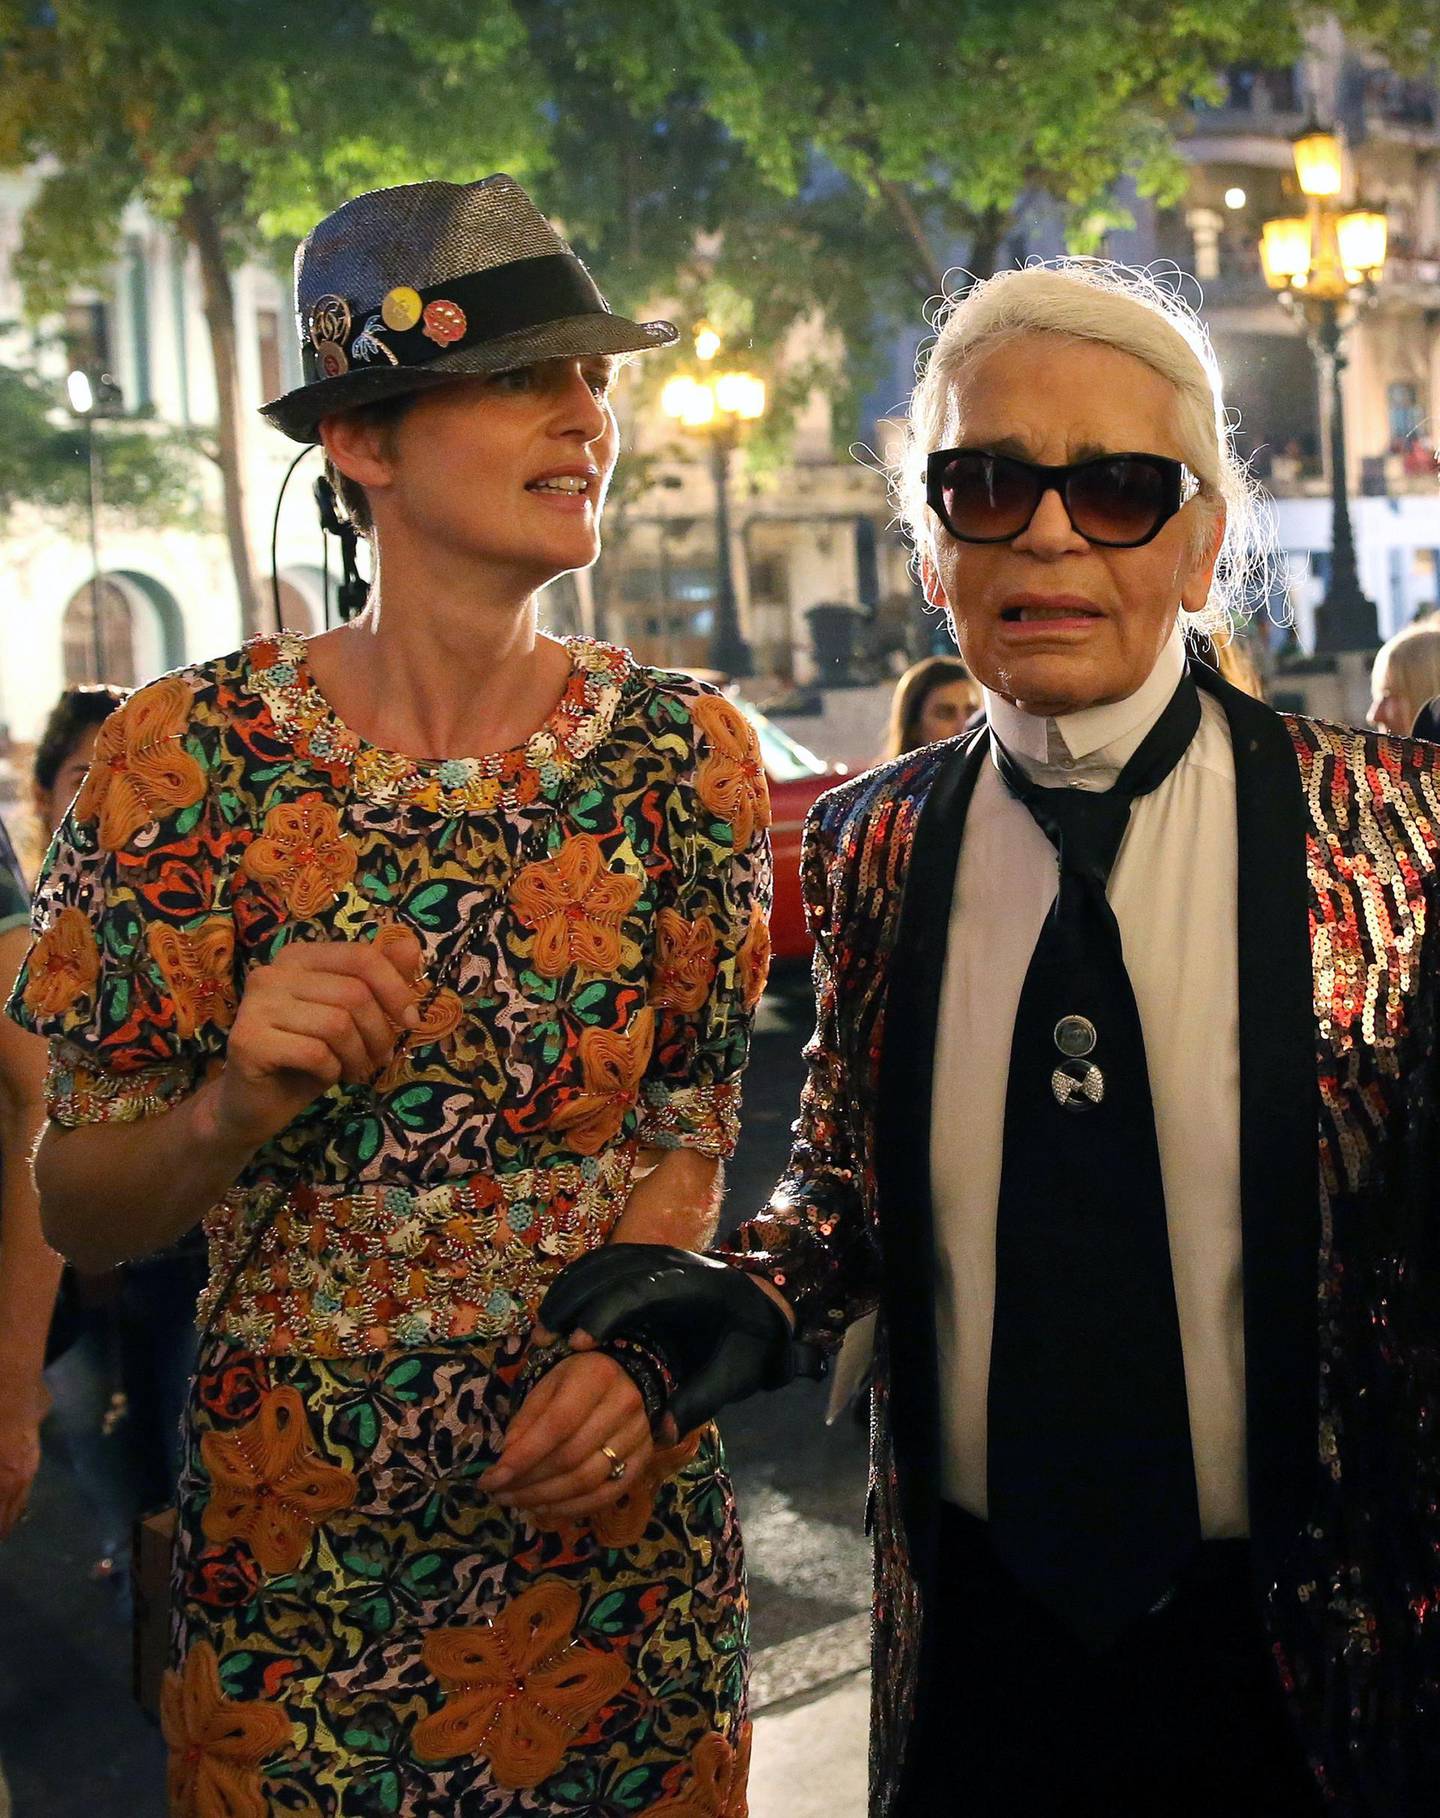 epa08901063 (FILE) - Creative director of fashion house Chanel, German fashion designer Karl Lagerfeld (R) and British model Stella Tennant (L) are seen after Chanel's fashion show in Havana, Cuba, 03 May 2016  (reissued 23 December 2020). According to media reports, Stella Tennant has died aged 50, her family confirmed.  EPA/ALEJANDRO ERNESTO *** Local Caption *** 52737051